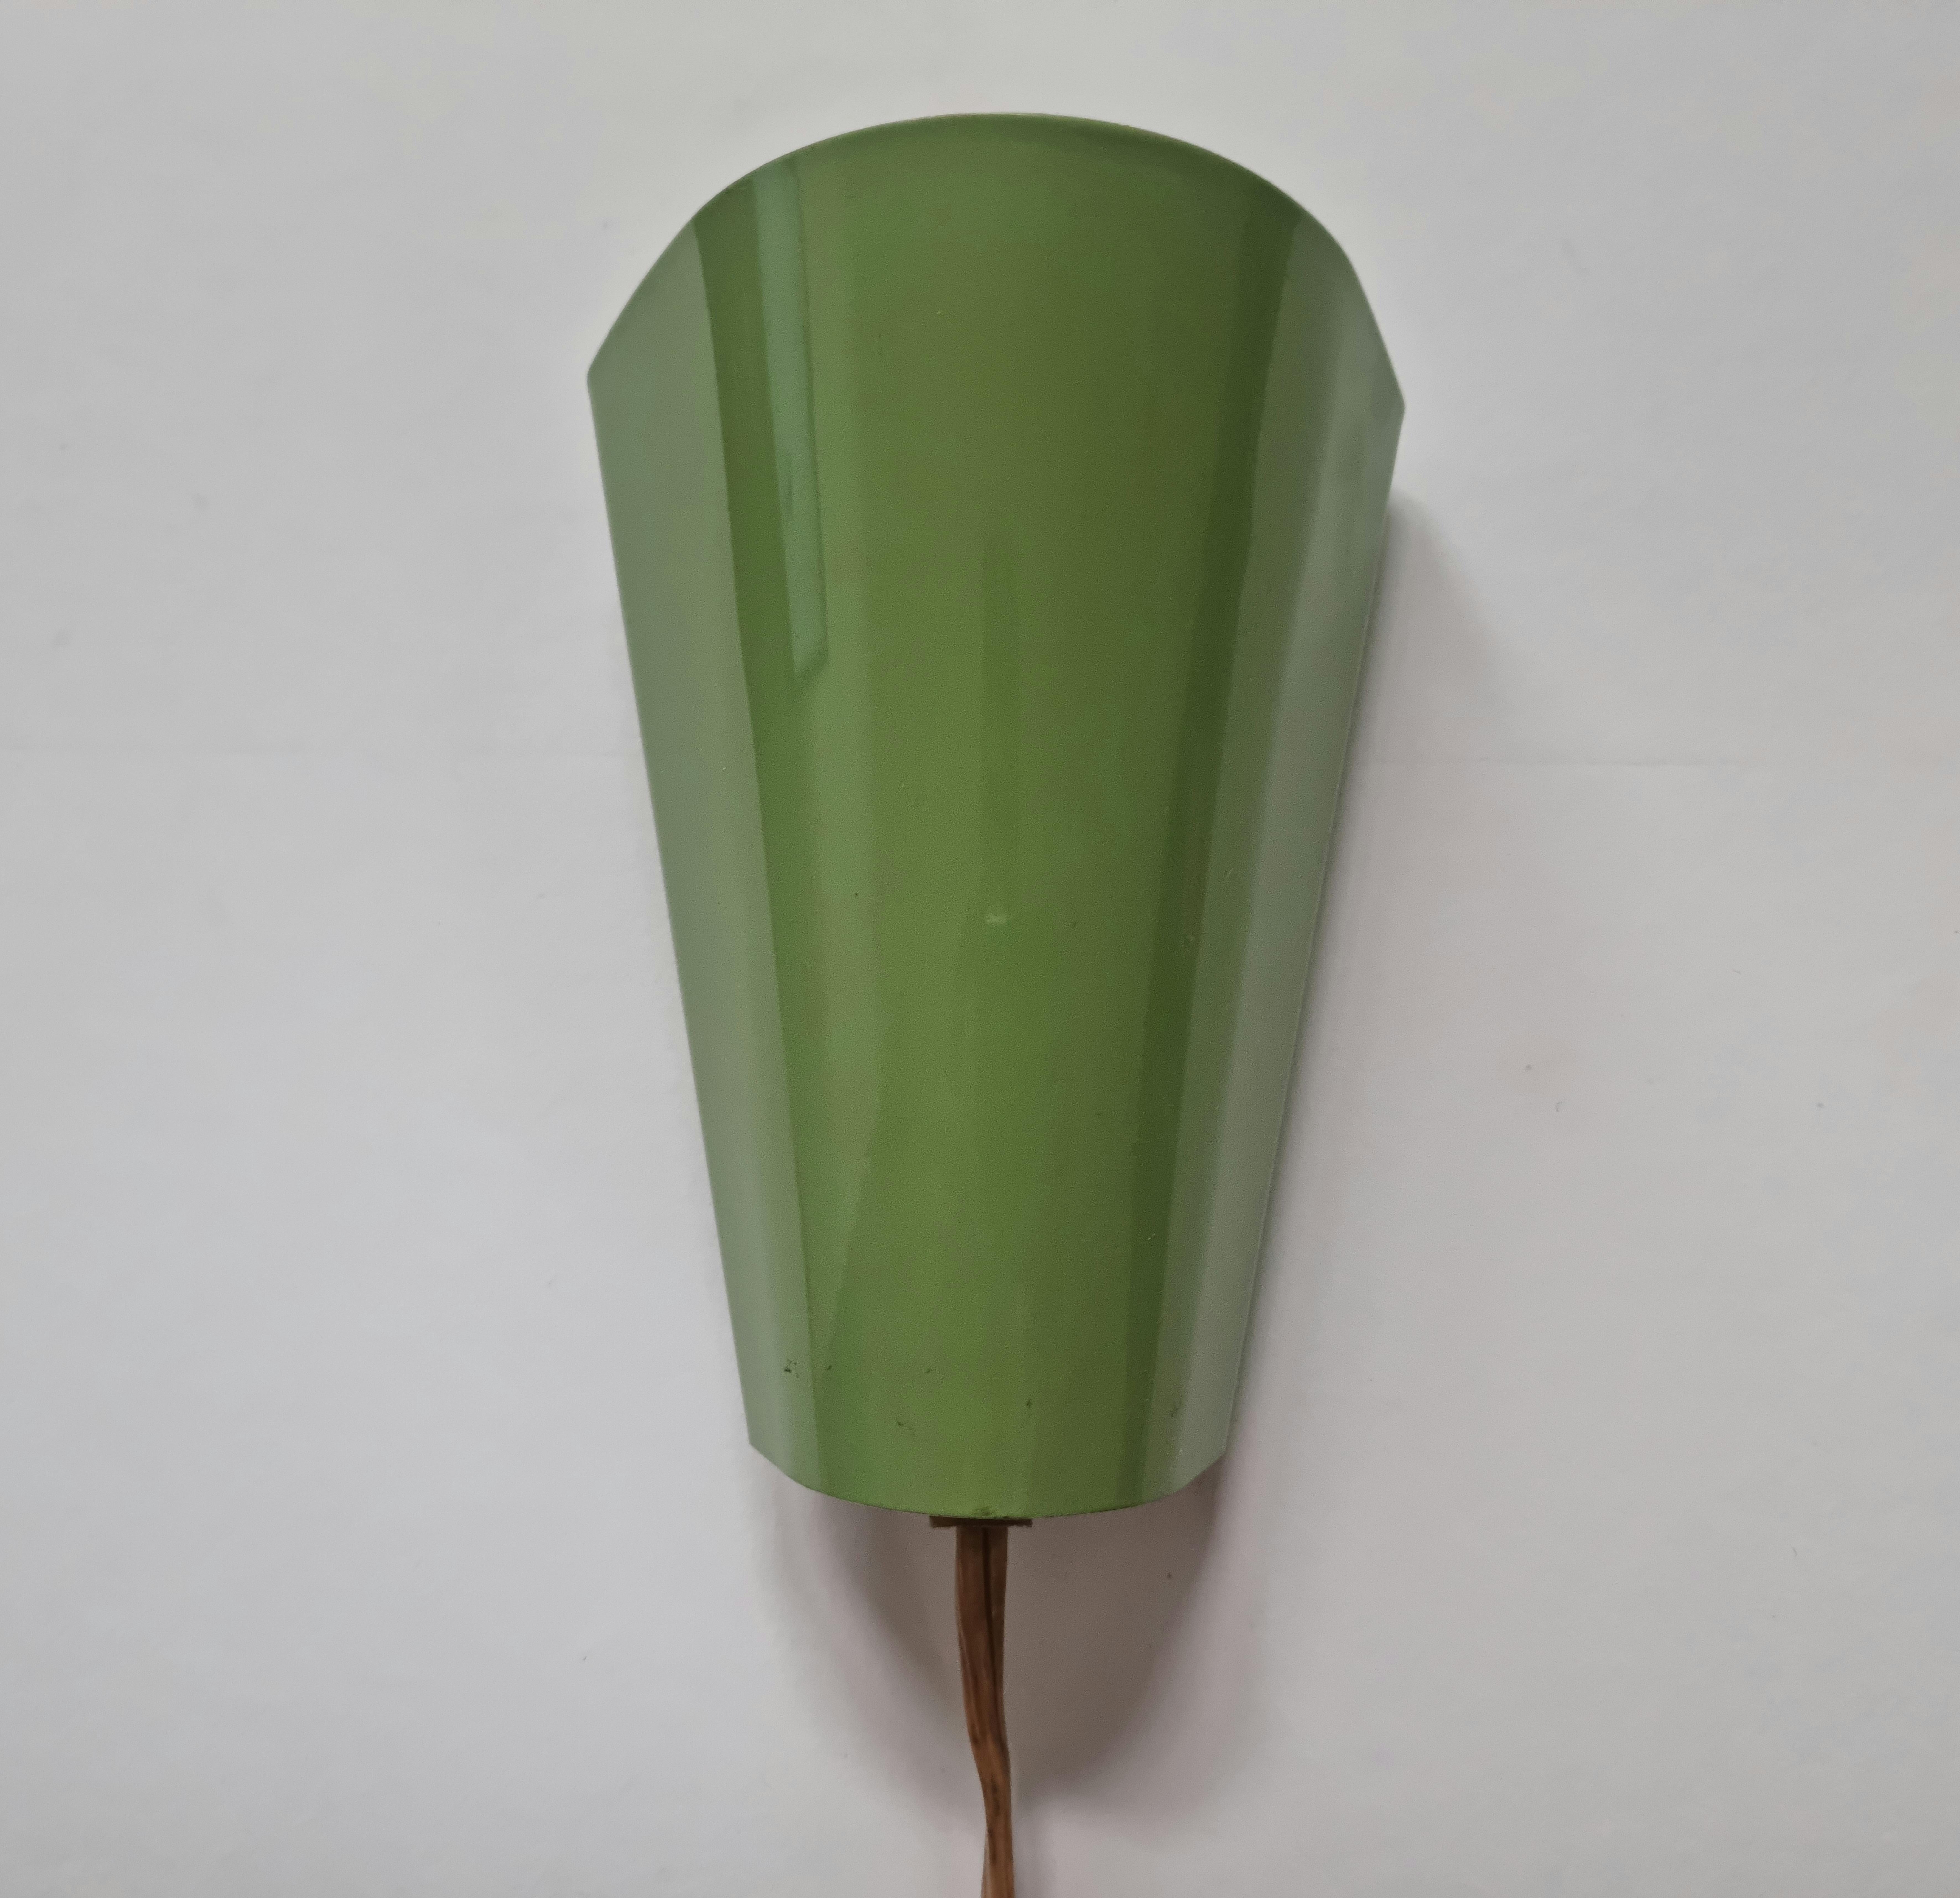 Midcentury Rare Wall Lamp Lidokov, Designed by Josef Hurka, 1960s For Sale 6